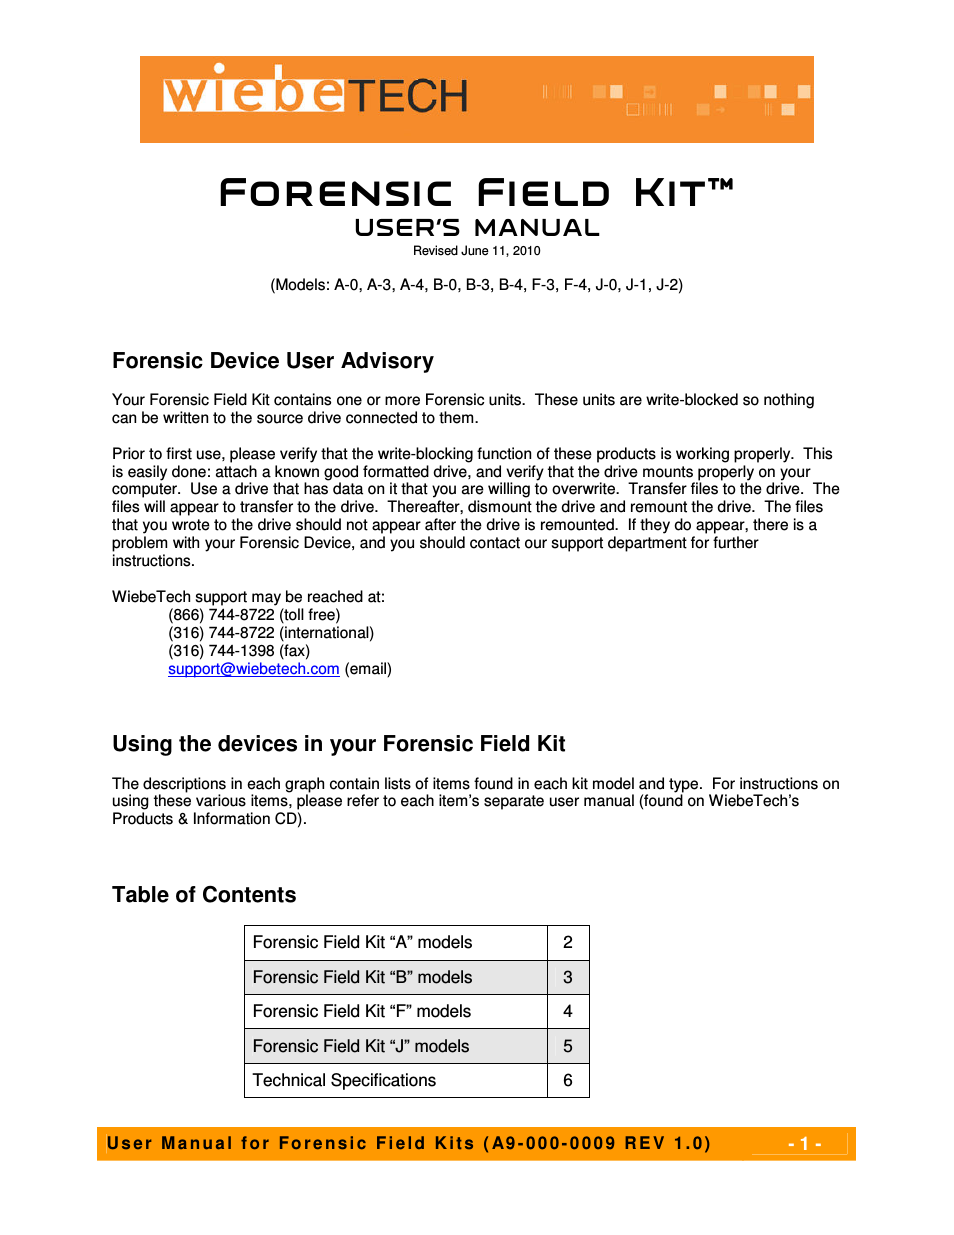 Forensic Field Kit A